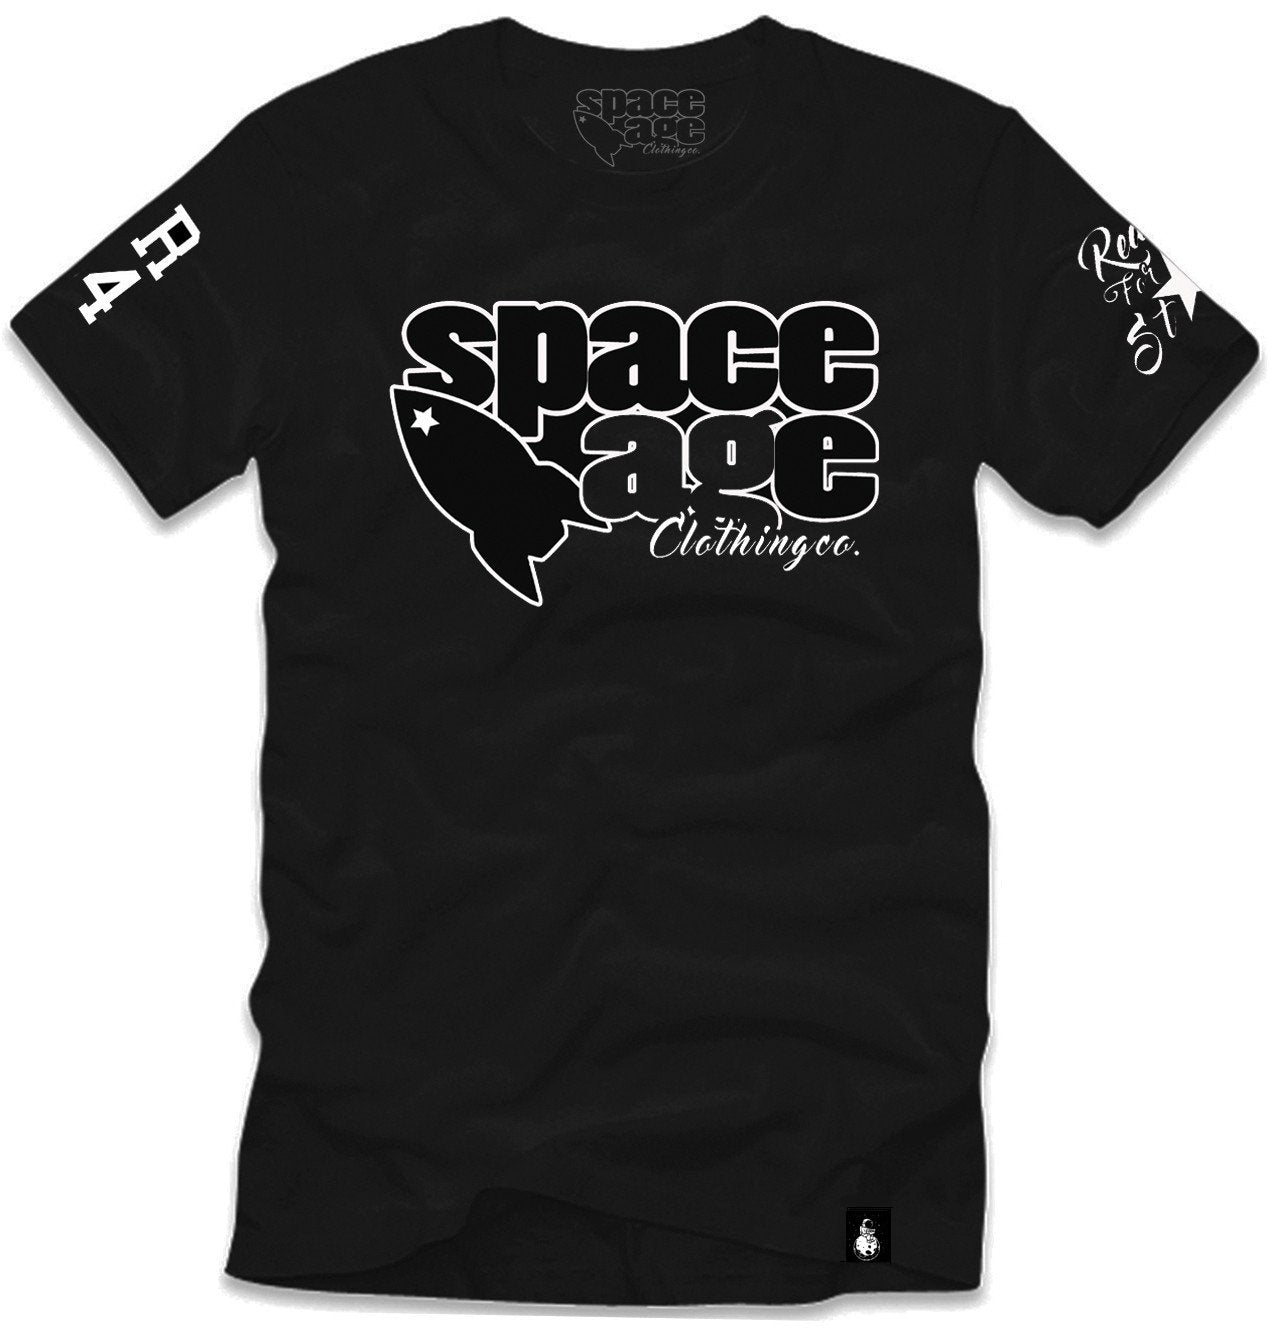 Space Age Clothing Co. T-Shirt - Black / White